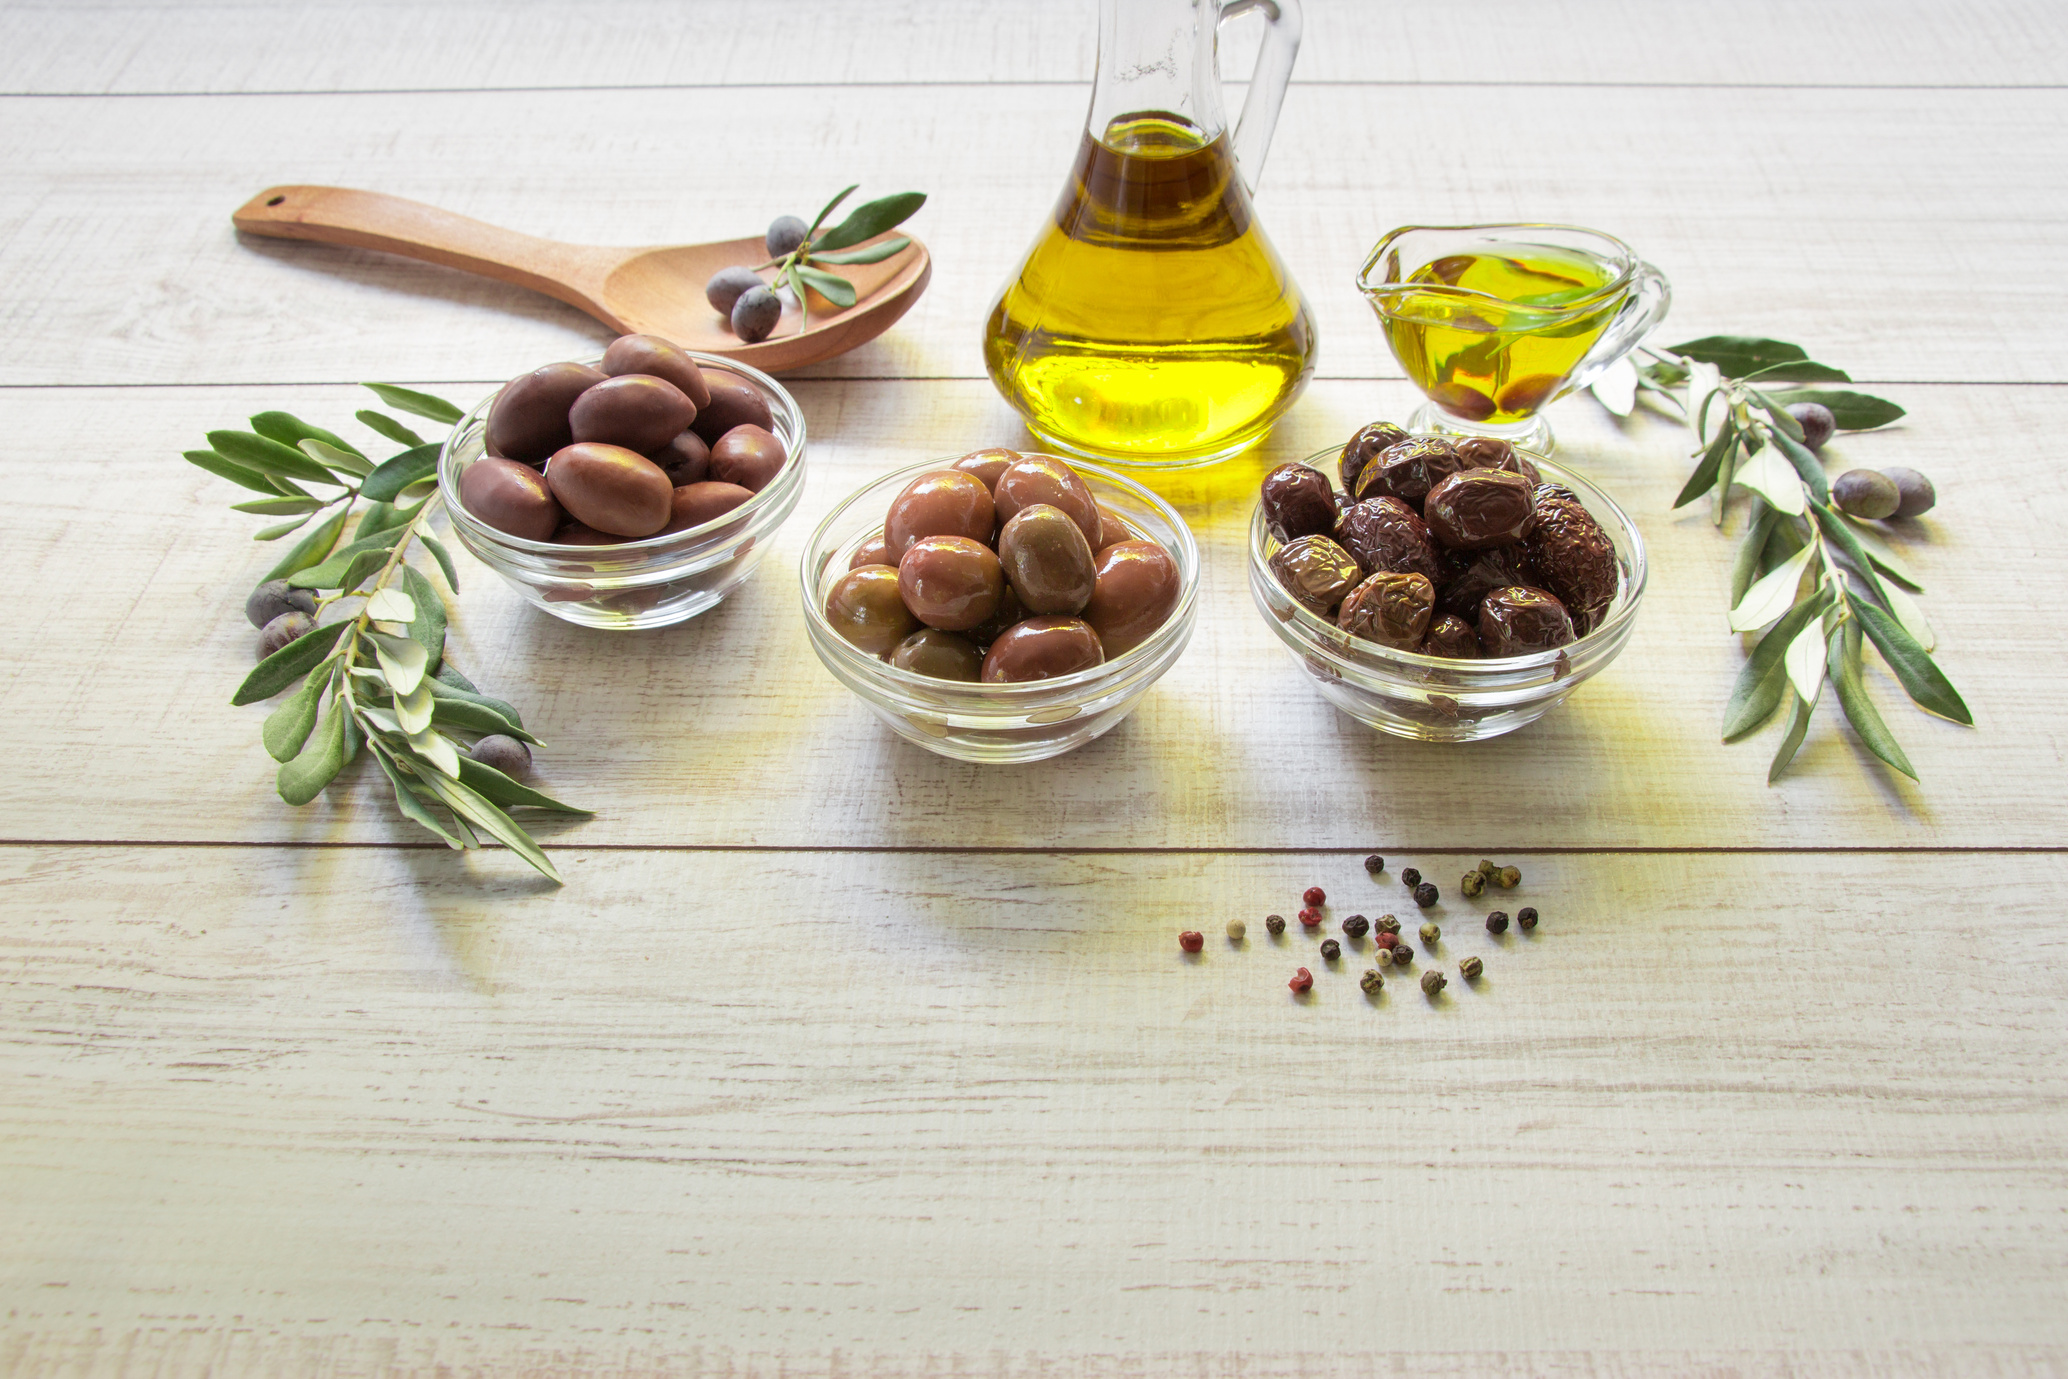 Olives and olive oil.